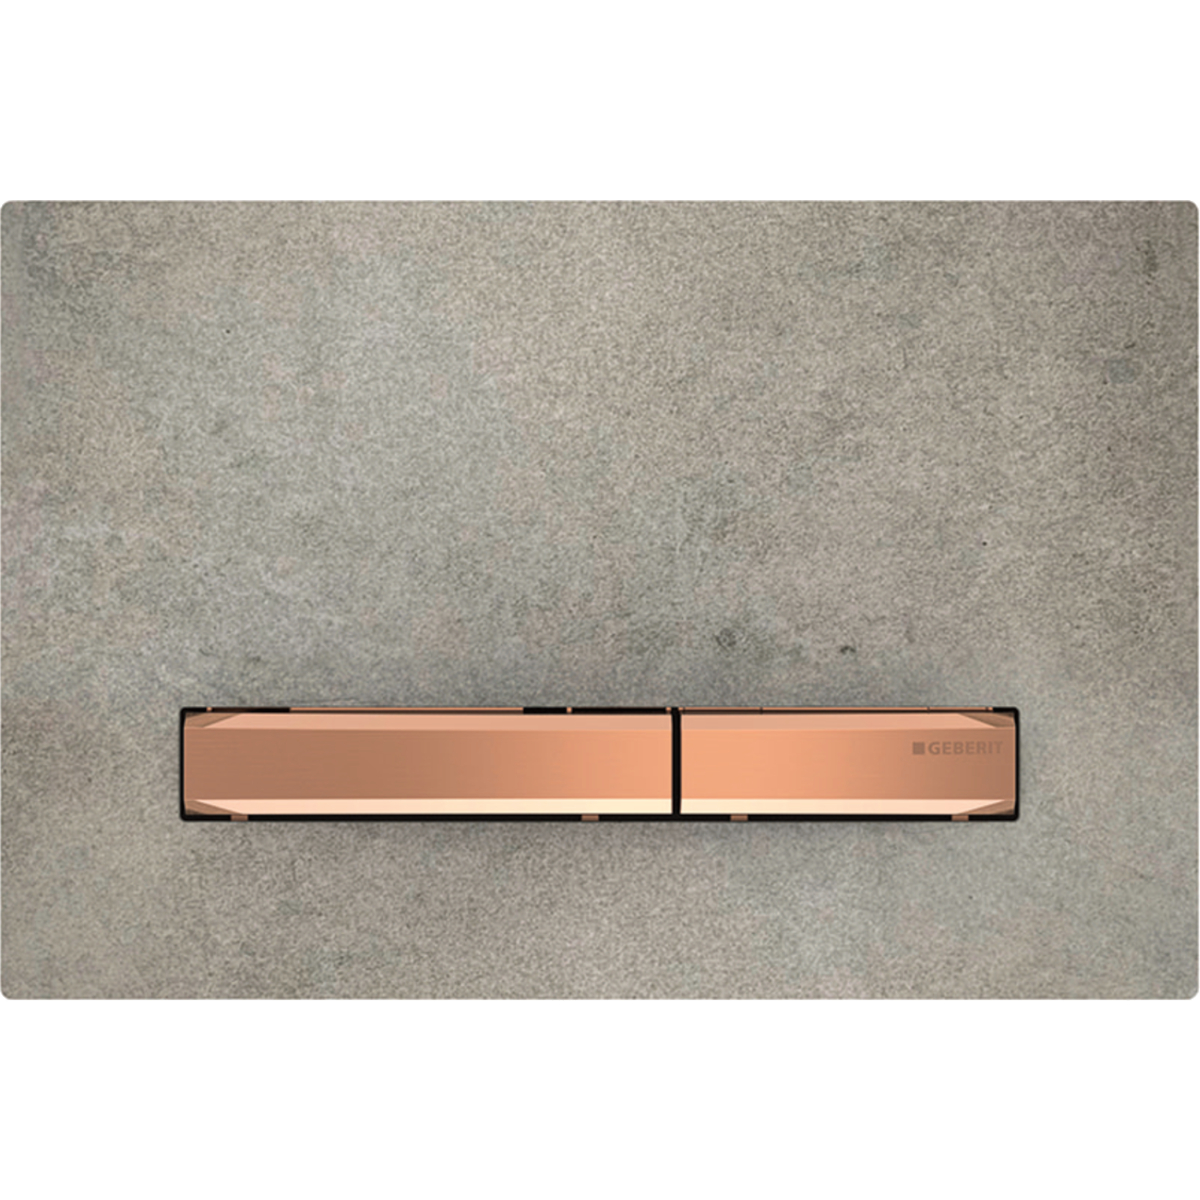 Geberit 115.670.JV.2 Actuator Plate Sigma50 for Dual Flush, Metal Colour Red Gold - Base Plate and Buttons: Red Gold/Cover Plate: Concrete Look